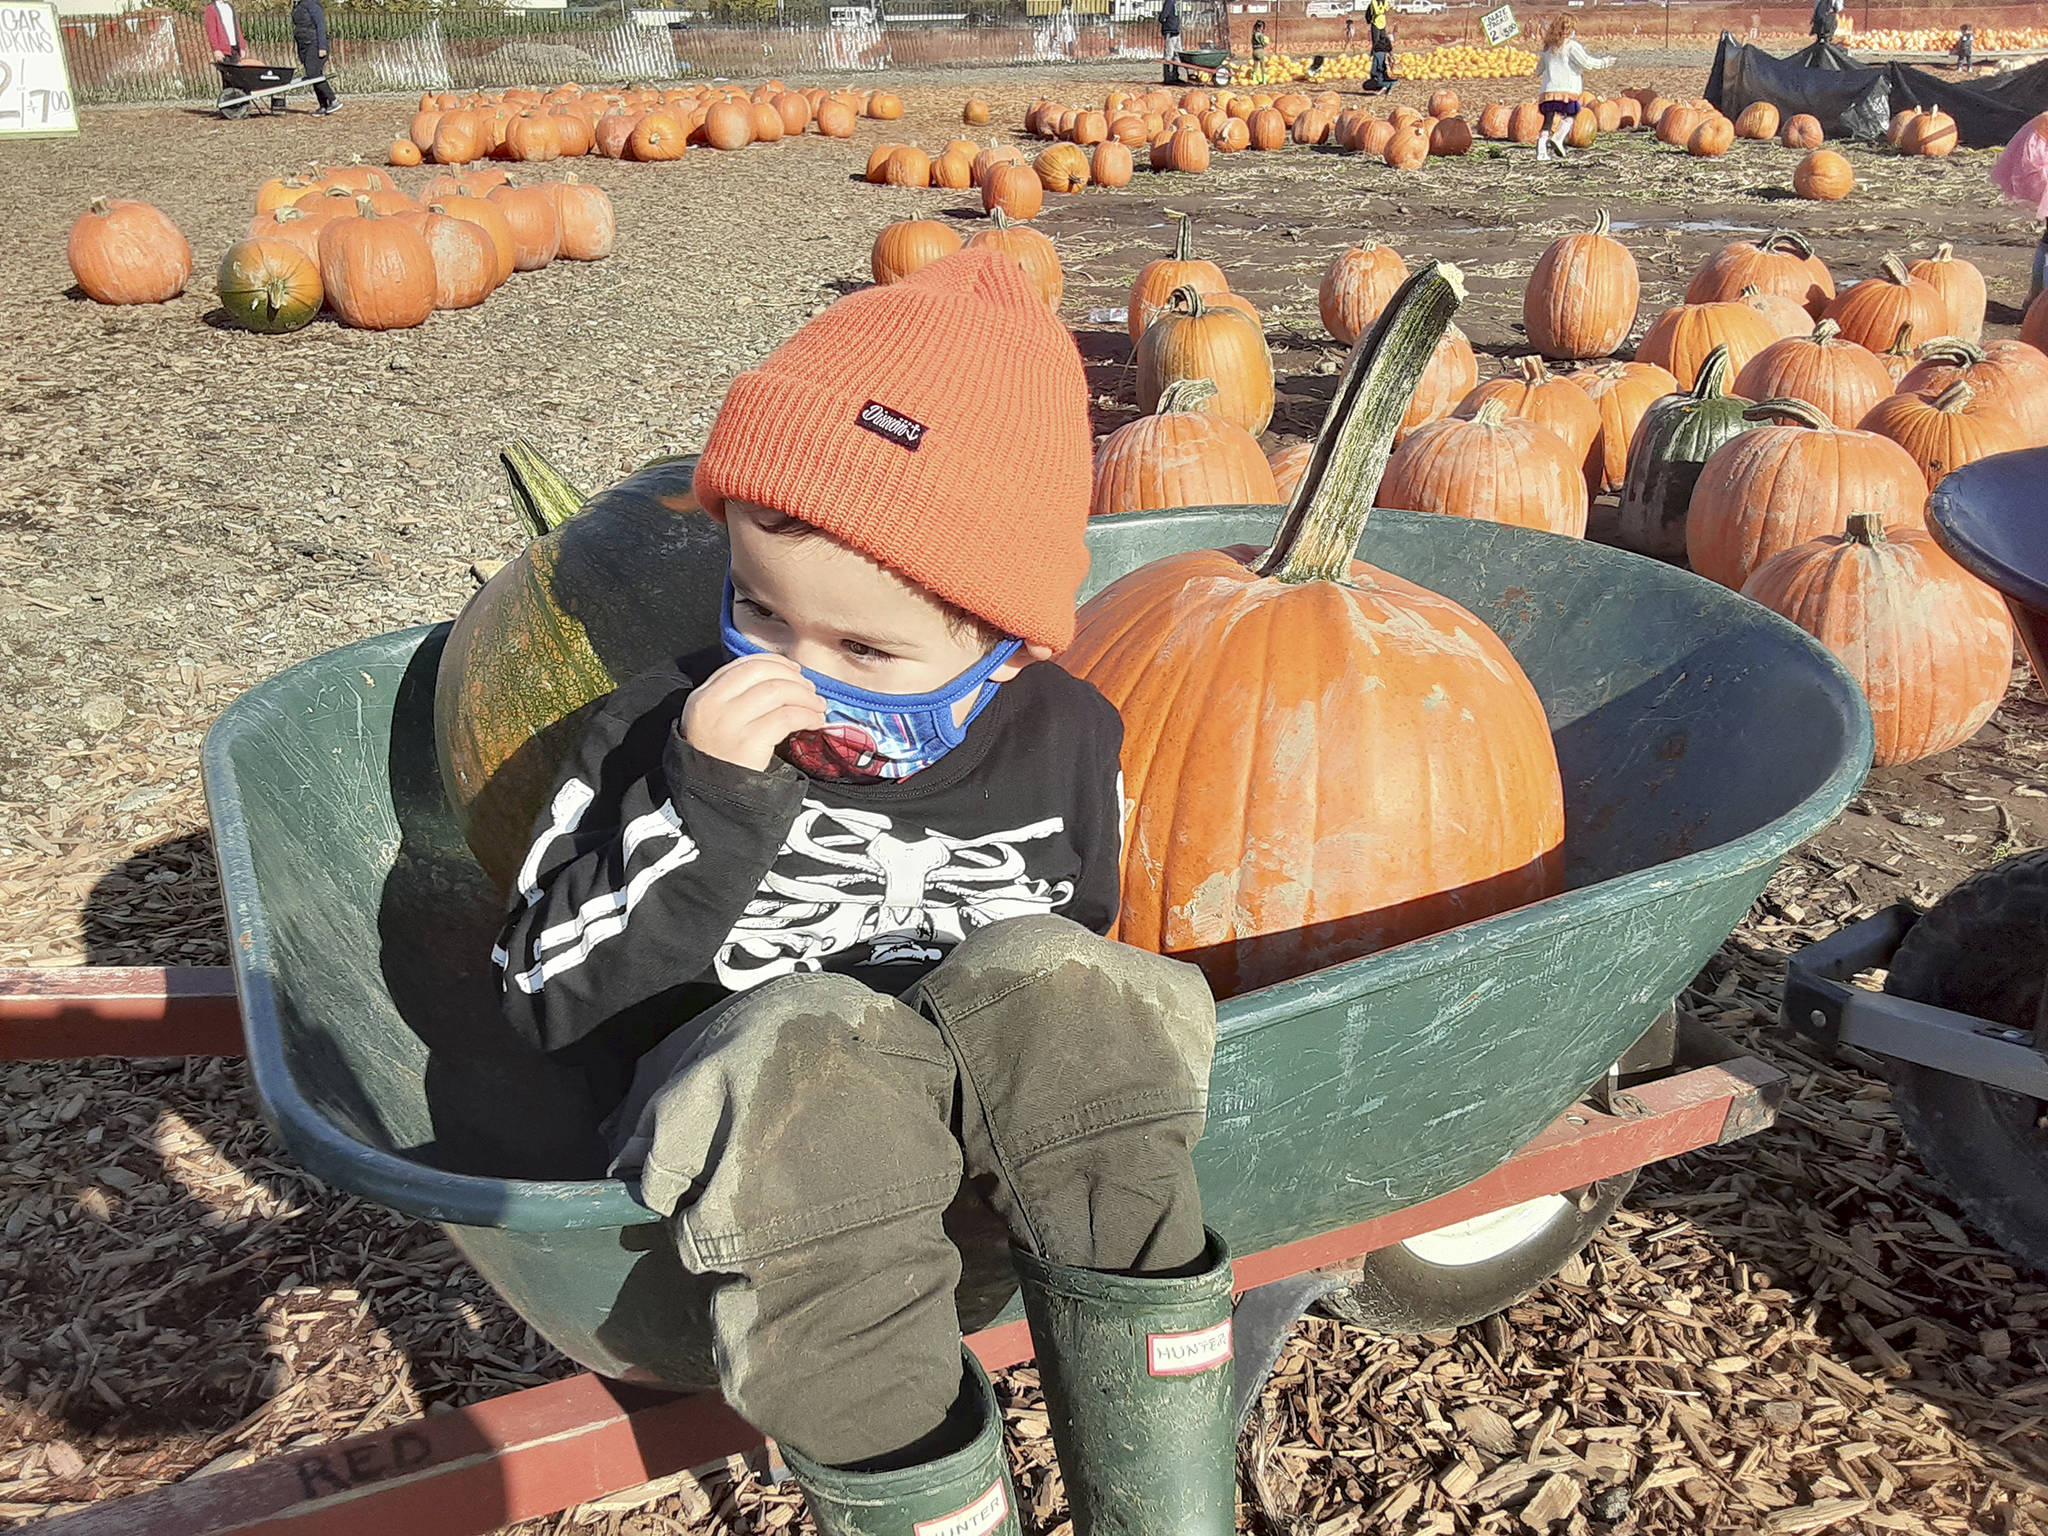 Milo Cleveland, age 4 but closing in on 5, was excited about the prospect of pumpkins last week at the Carpinito Bros. Pumpkin Patch, 27508 W. Valley Hwy. N. in Kent. ROBERT WHALE, Sound Publishing